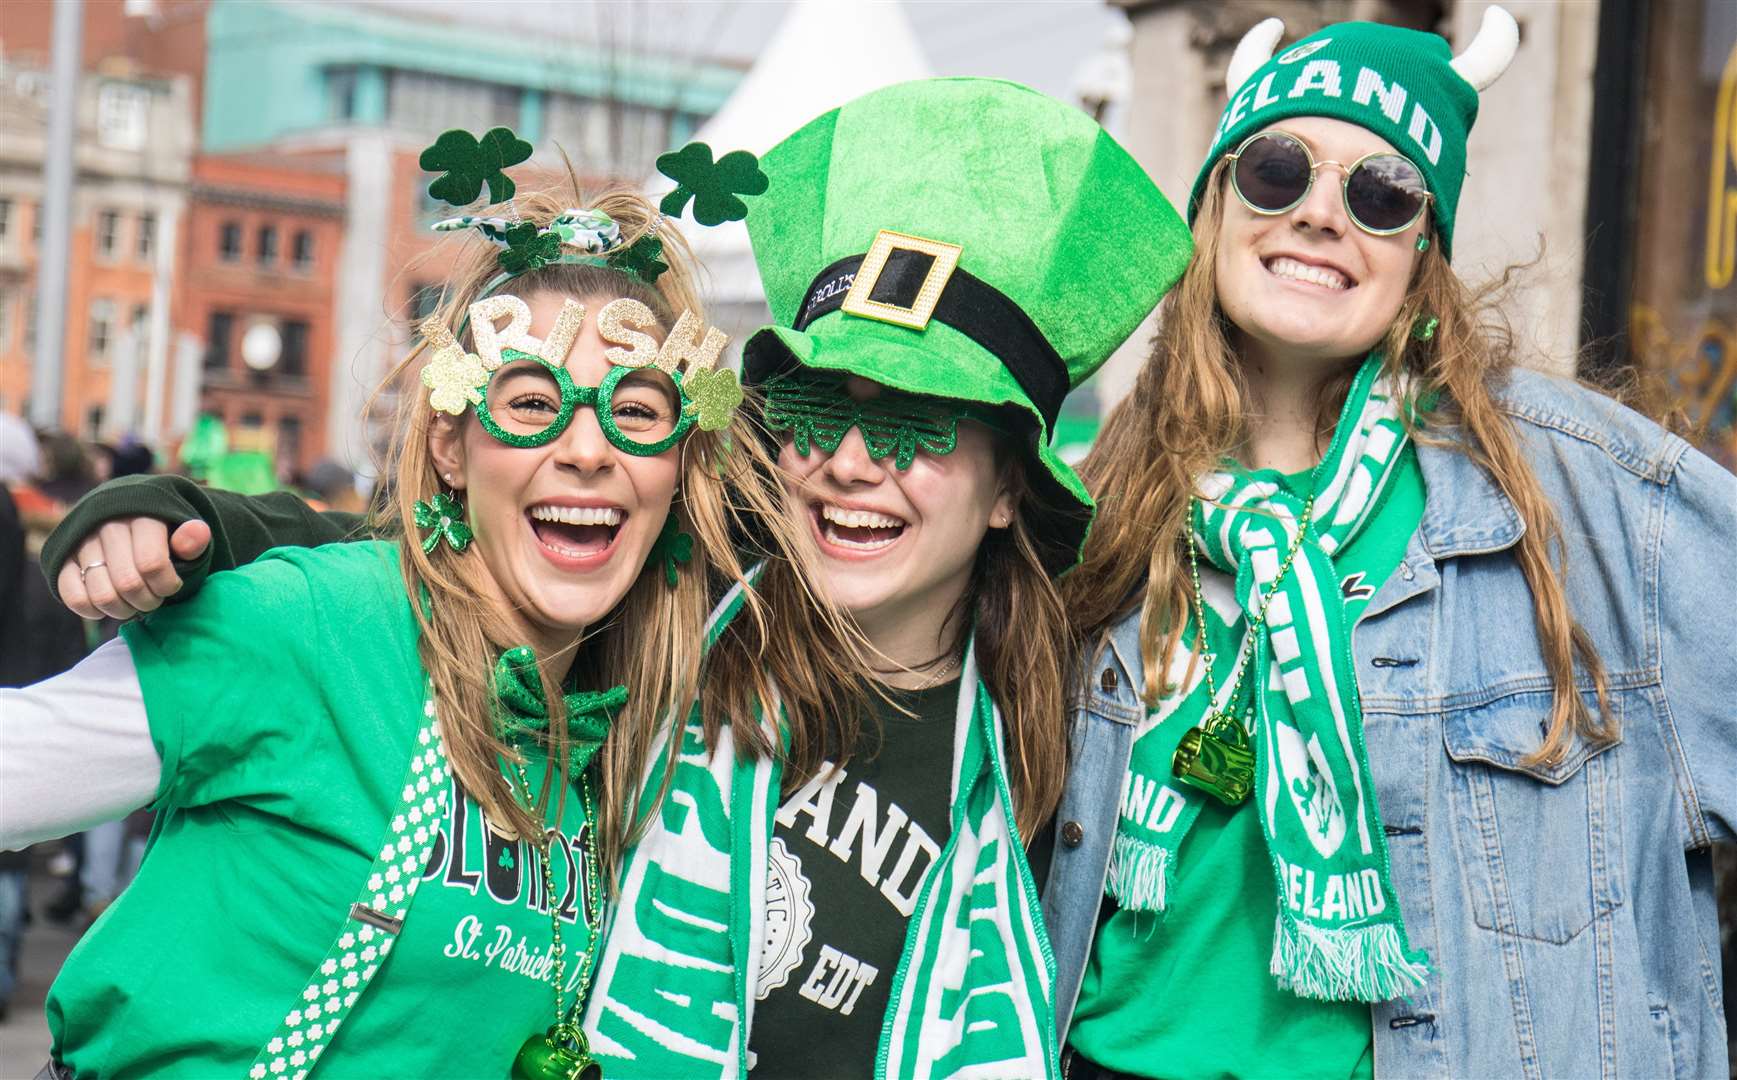 Celebrate St Patrick’s Day with Irish drinks, dance and music. Picture: iStock